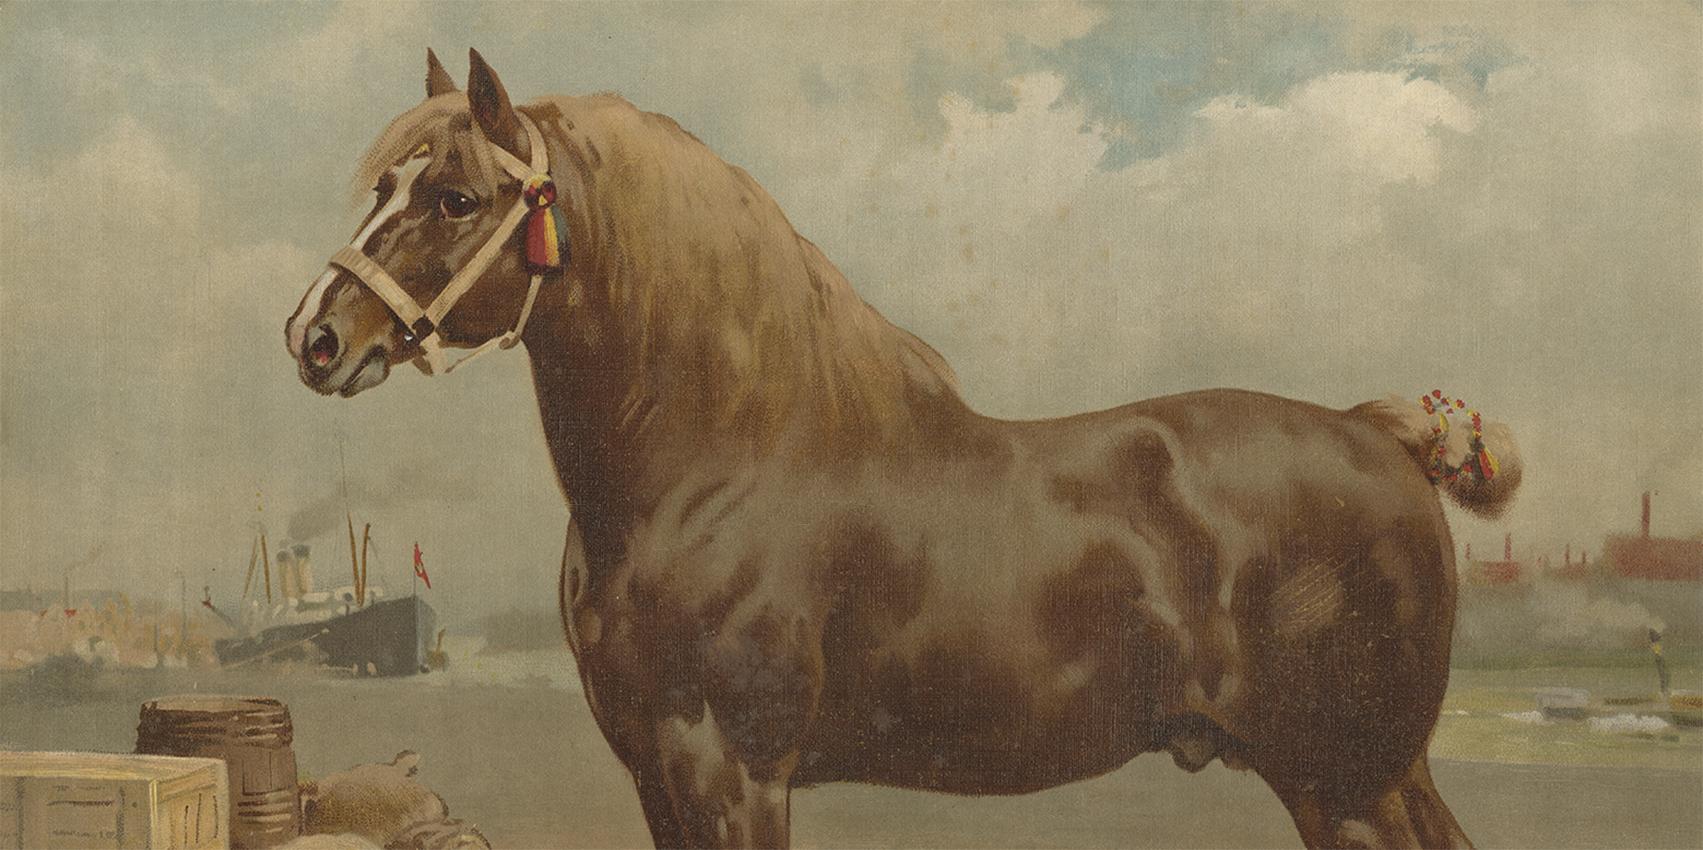 The lithograph of the Belgian Horse in the Dutch edition of 